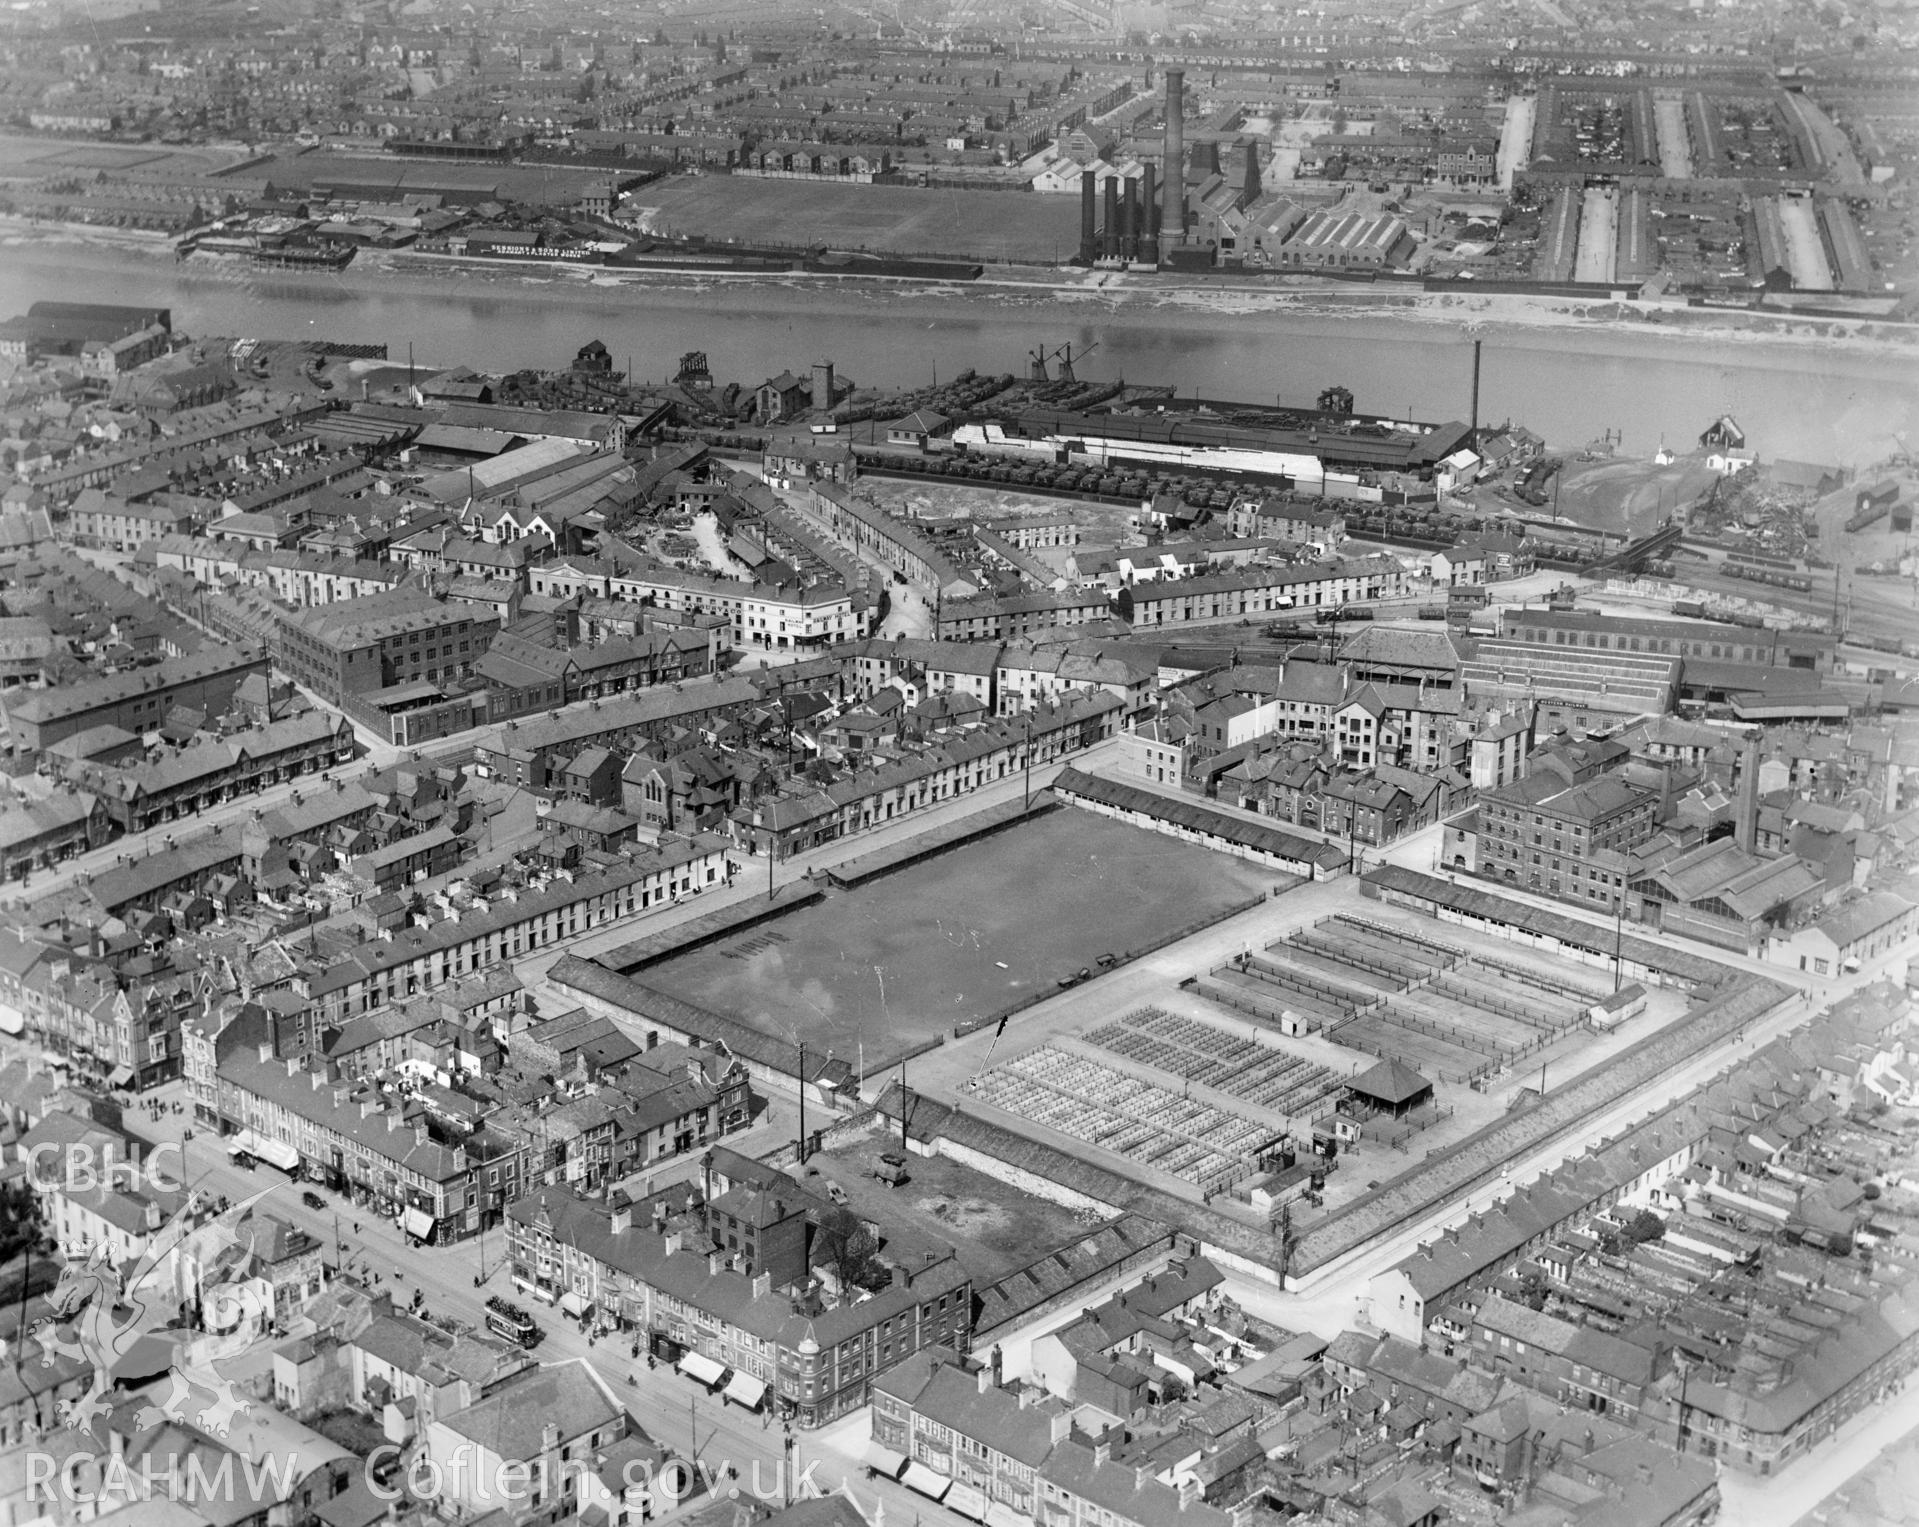 View of Newport showing town centre and cattle market, oblique aerial view. 5?x4? black and white glass plate negative.